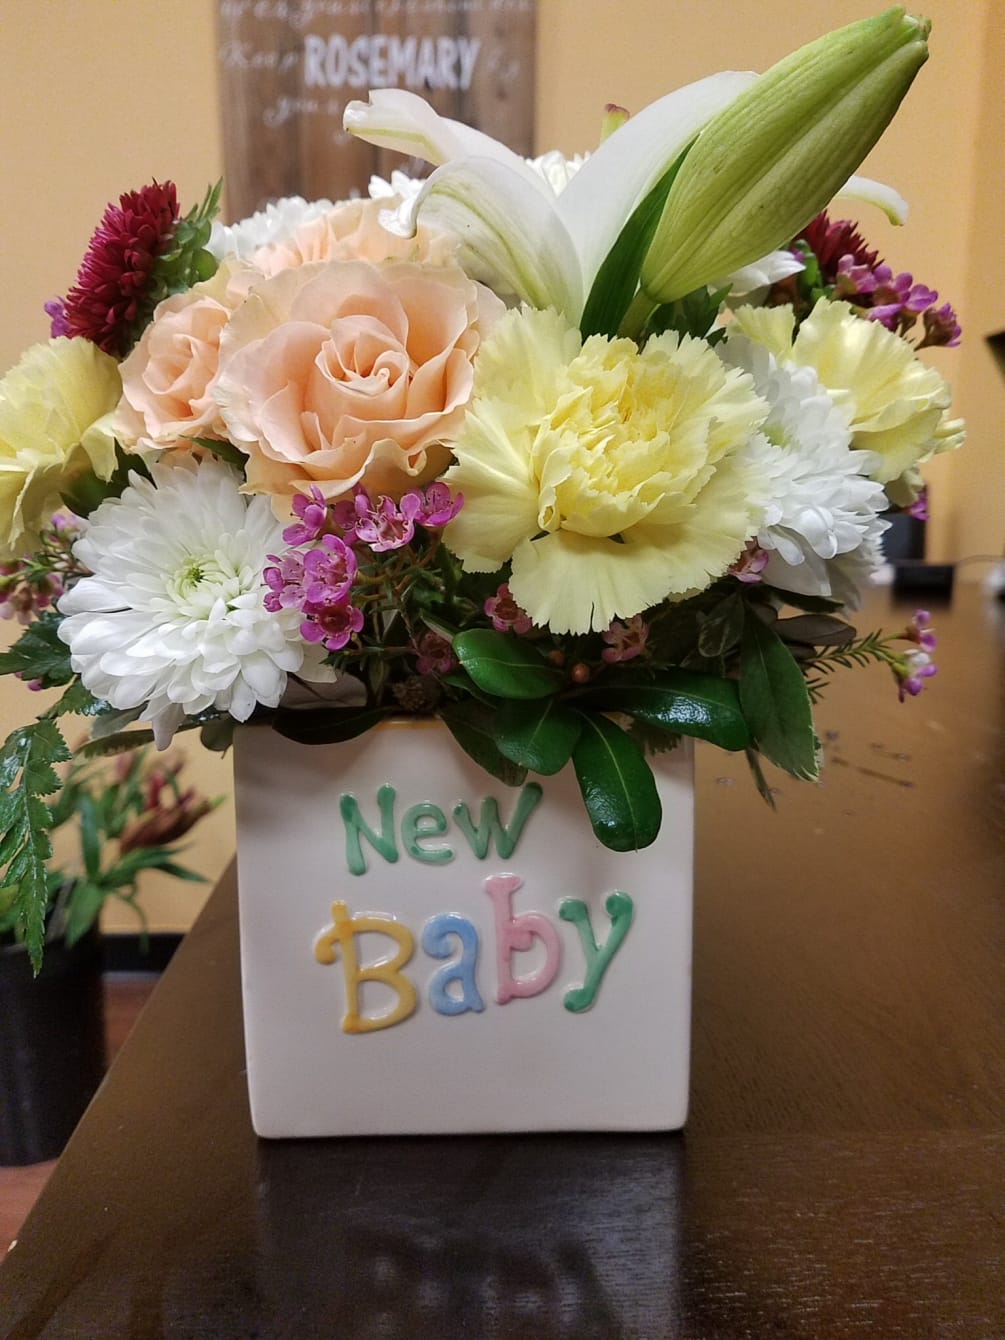 Welcome New Baby by Aleea Flowers